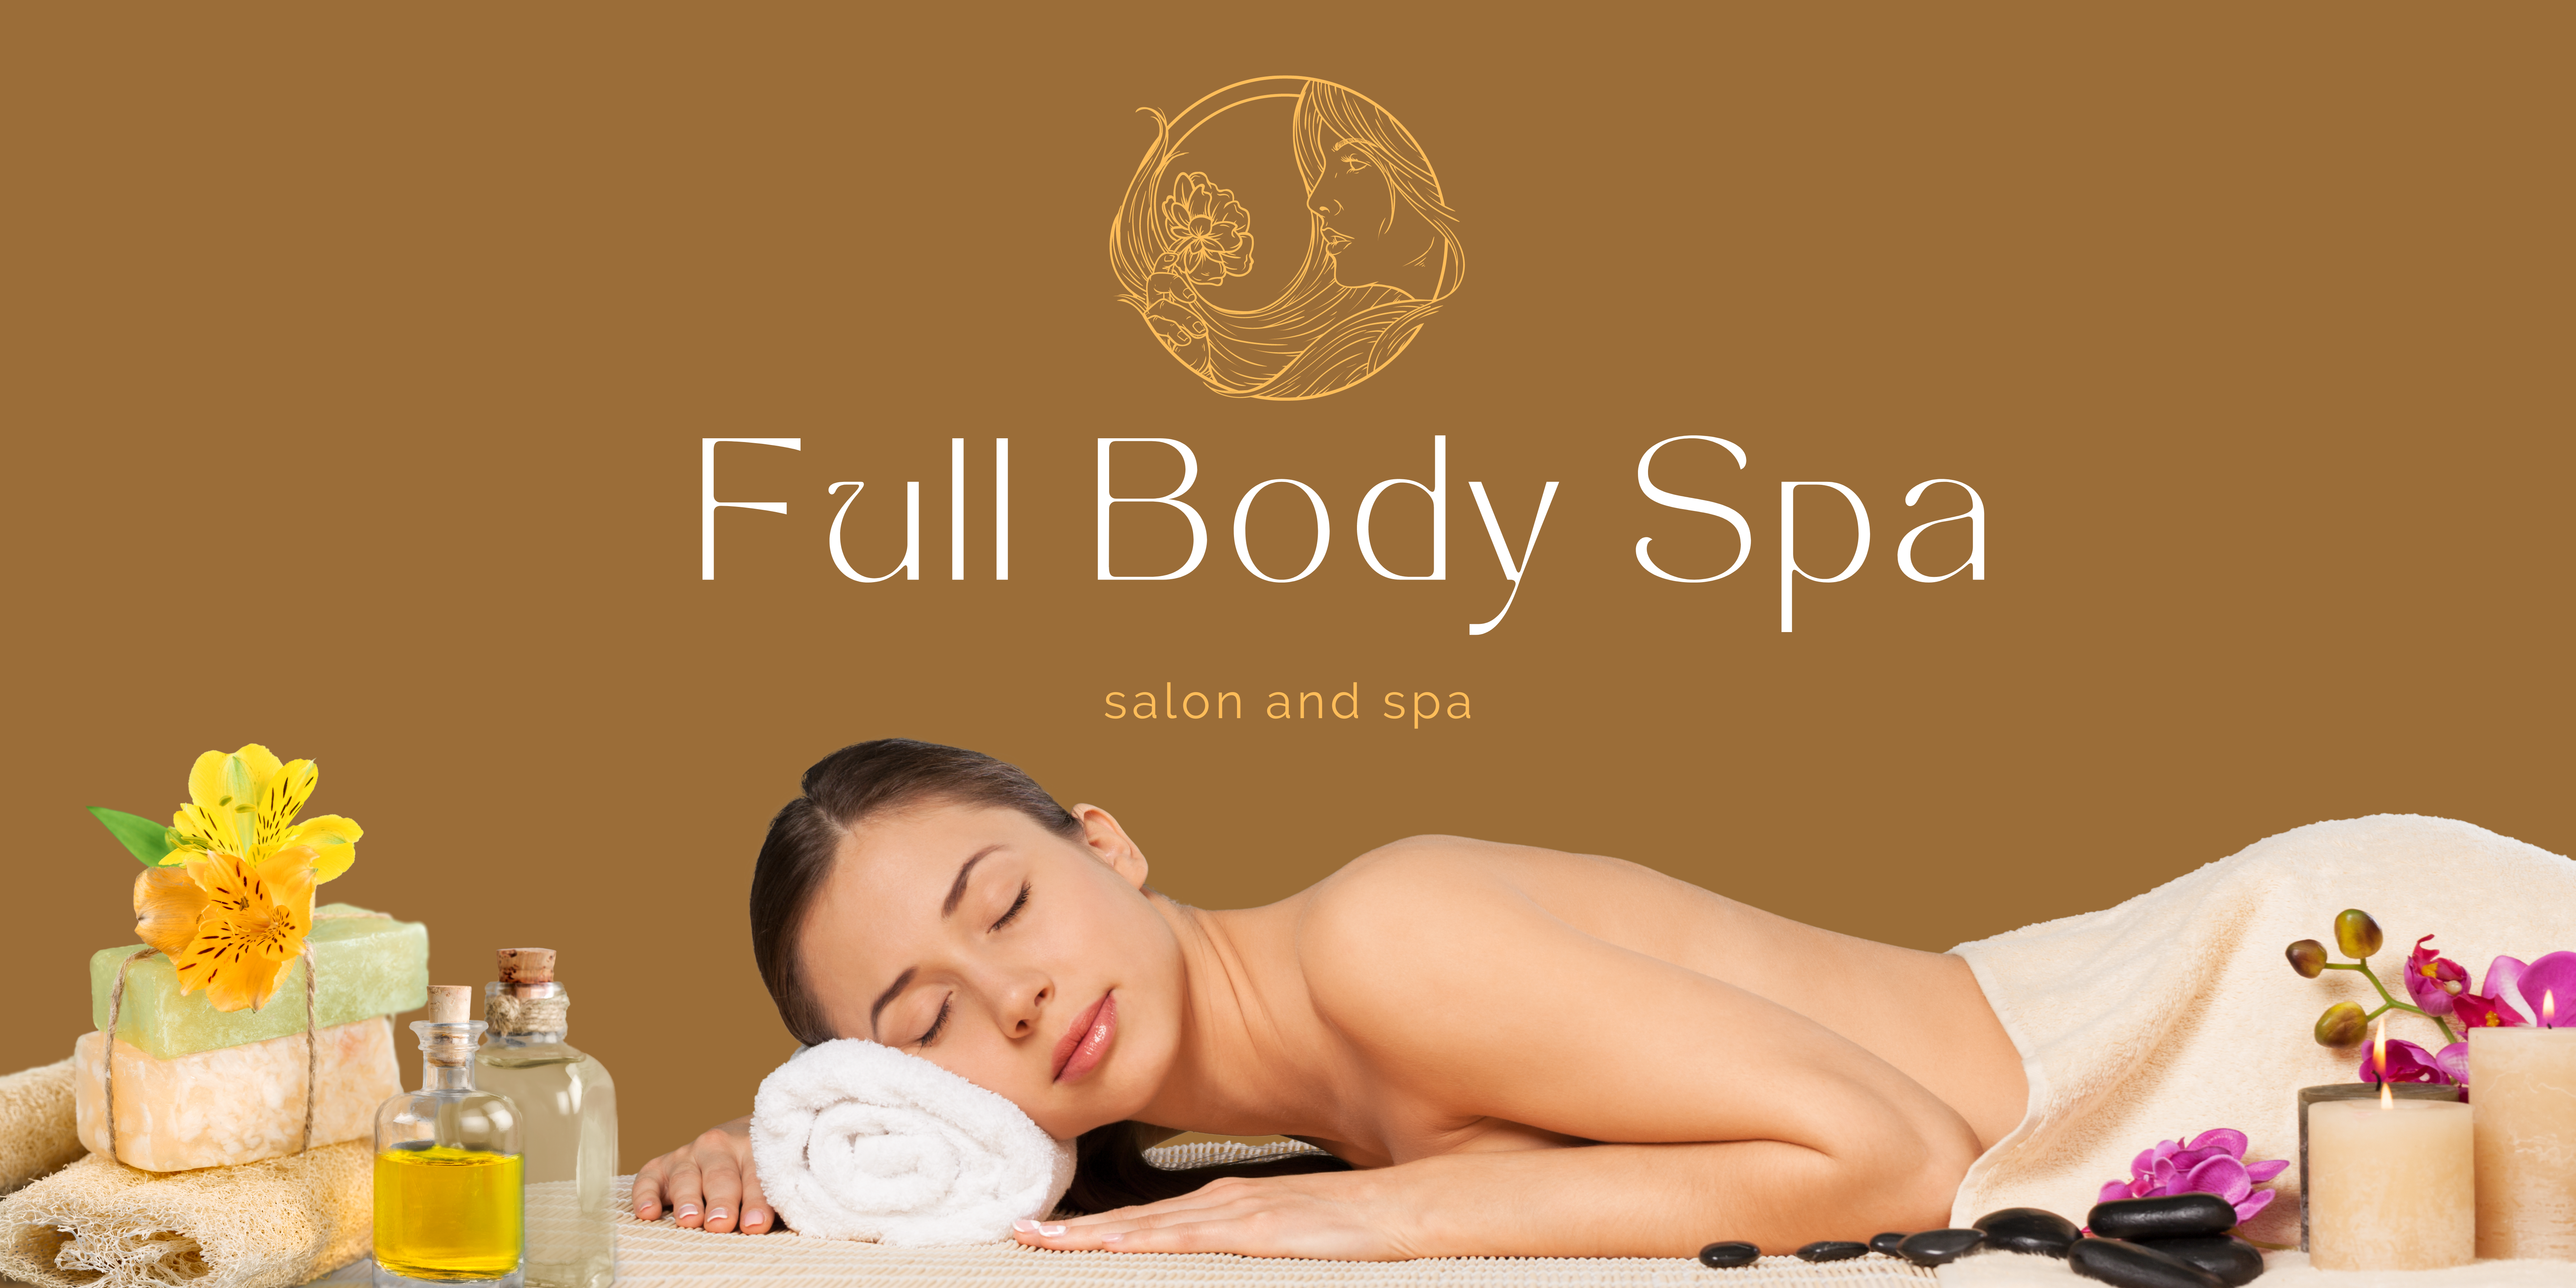 How To Find Body Spa Near Me Step By Step